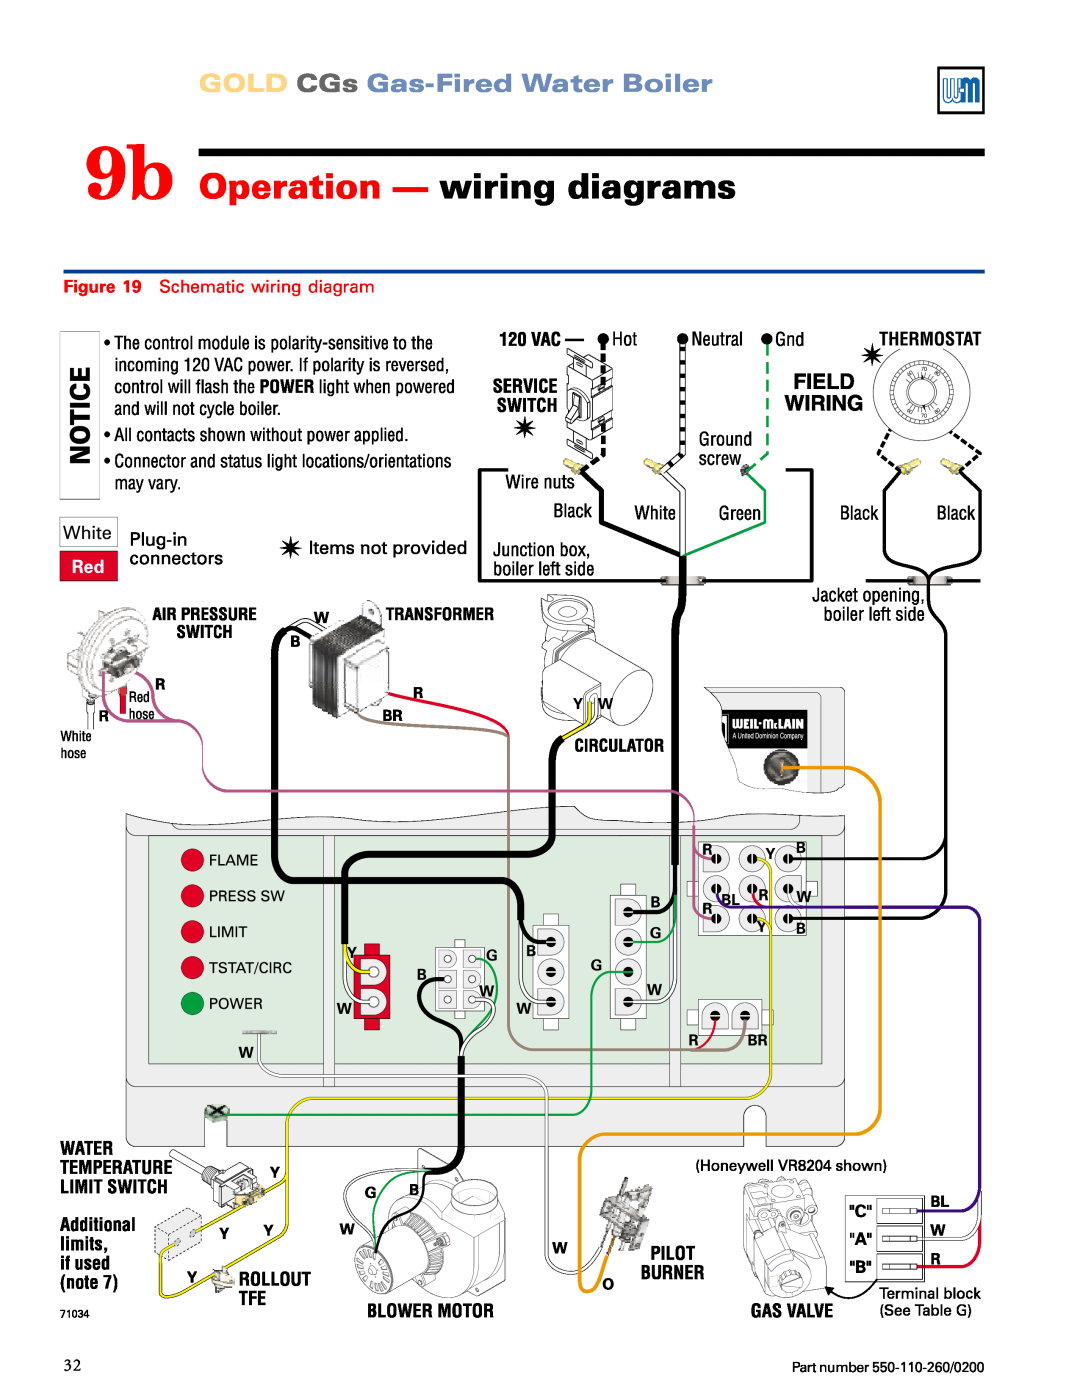 Weil-McLain 550-110-260/02002 9b Operation — wiring diagrams, GOLD CGs Gas-FiredWater Boiler, Schematic wiring diagram 